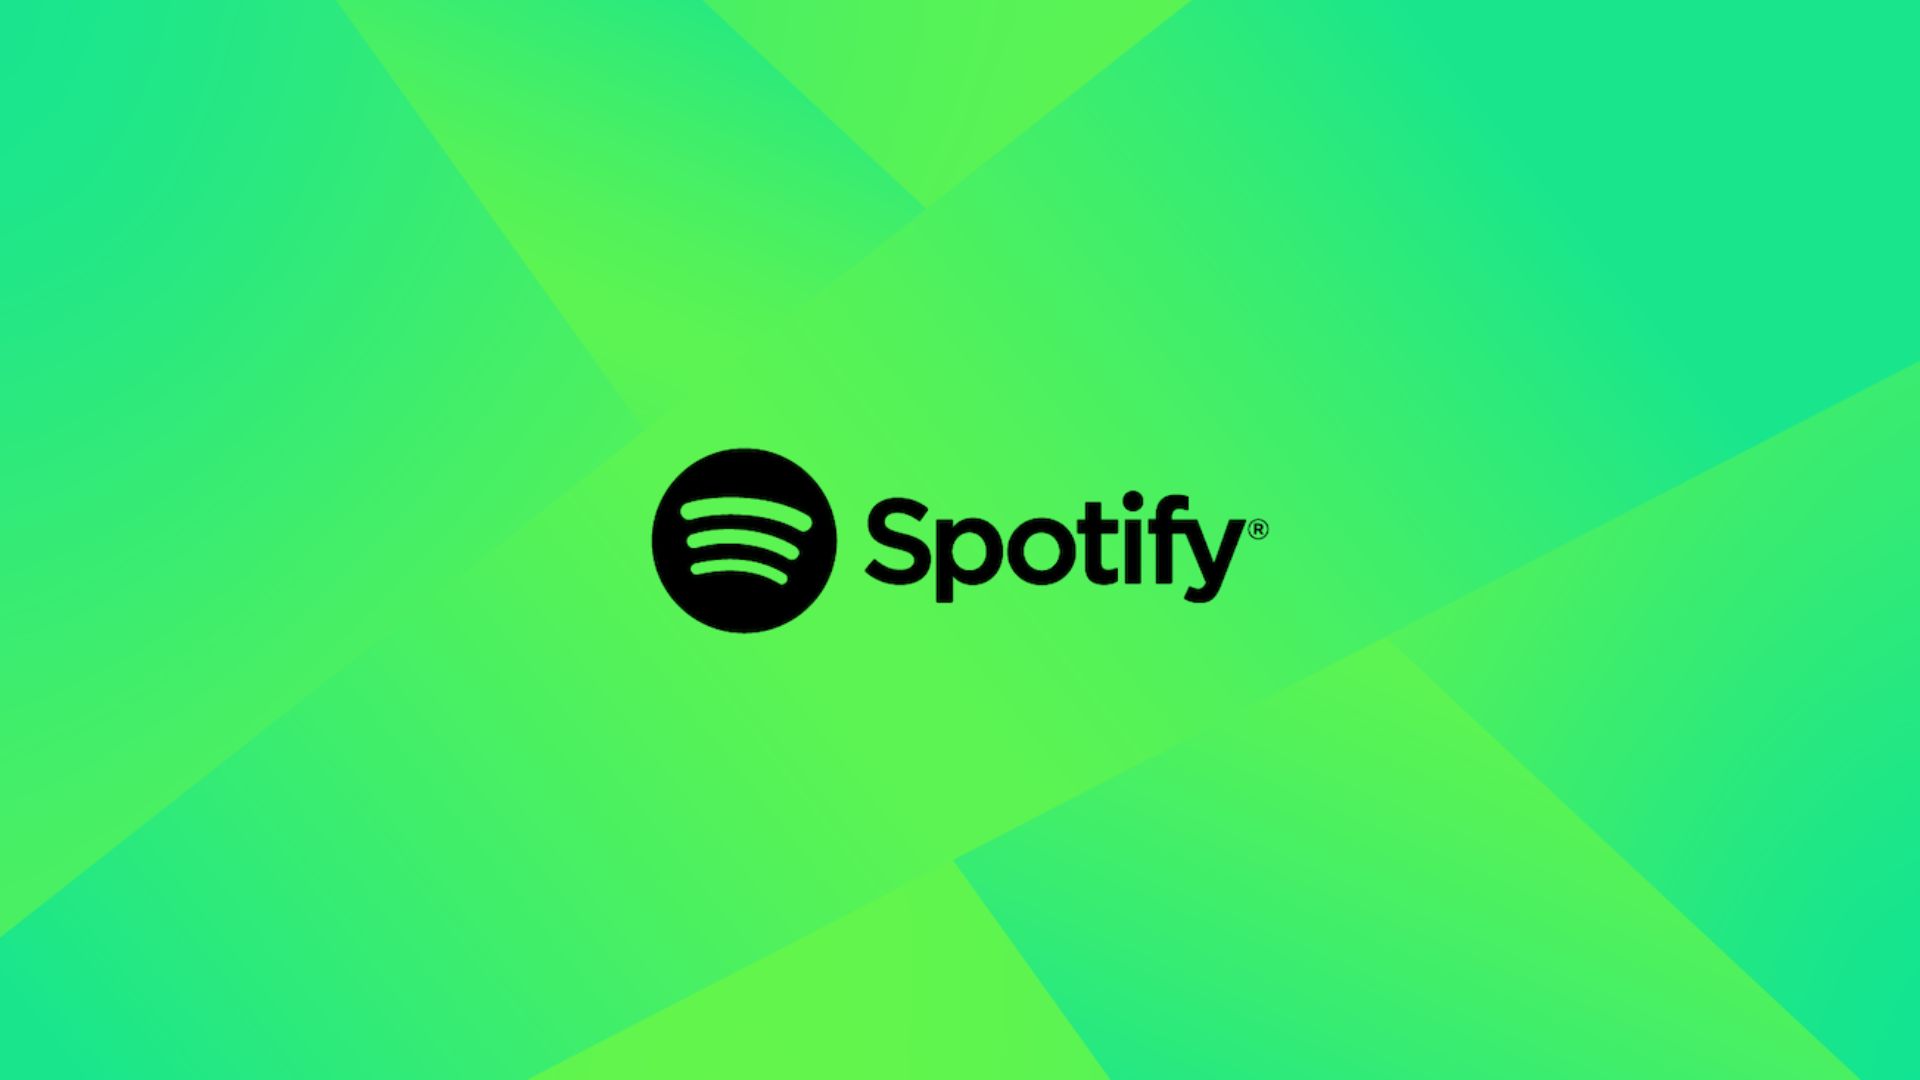 Spotify unveils its Song Psychic feature (Courtesy: Spotify Newsroom)